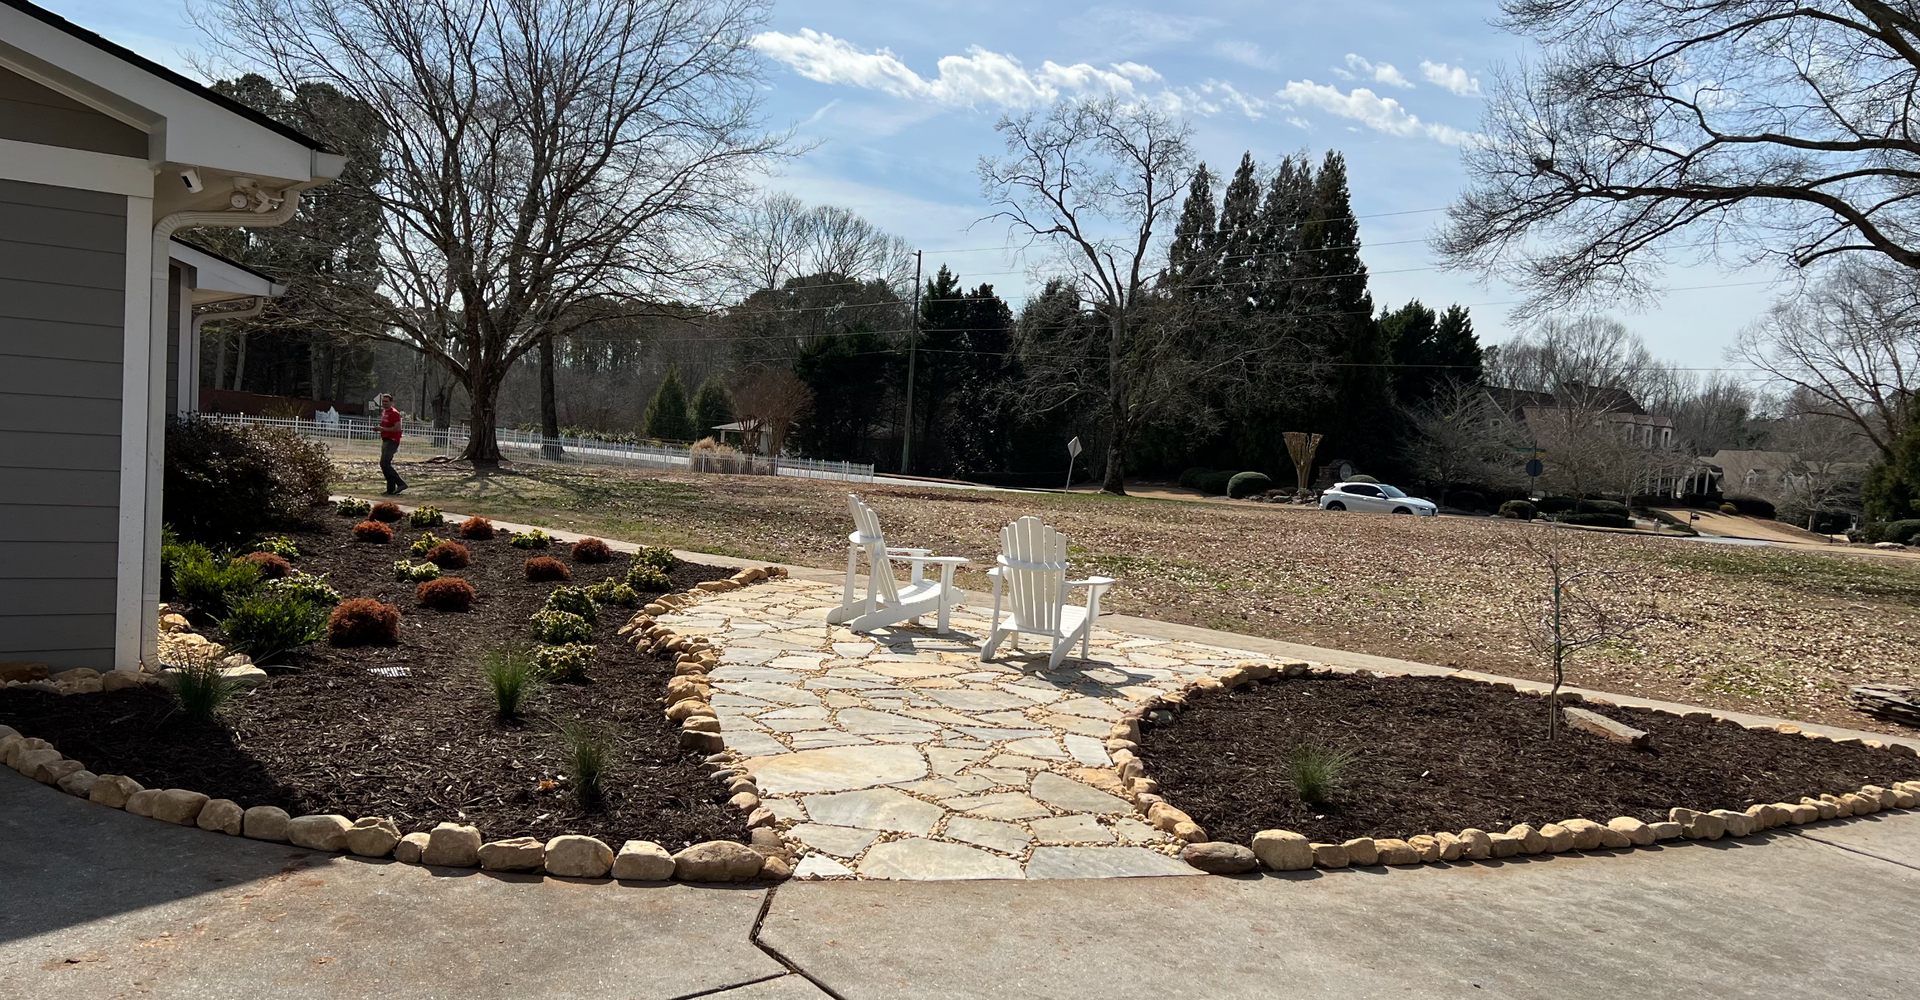 RC Landscapes' designed stone patio with integrated landscaping features.